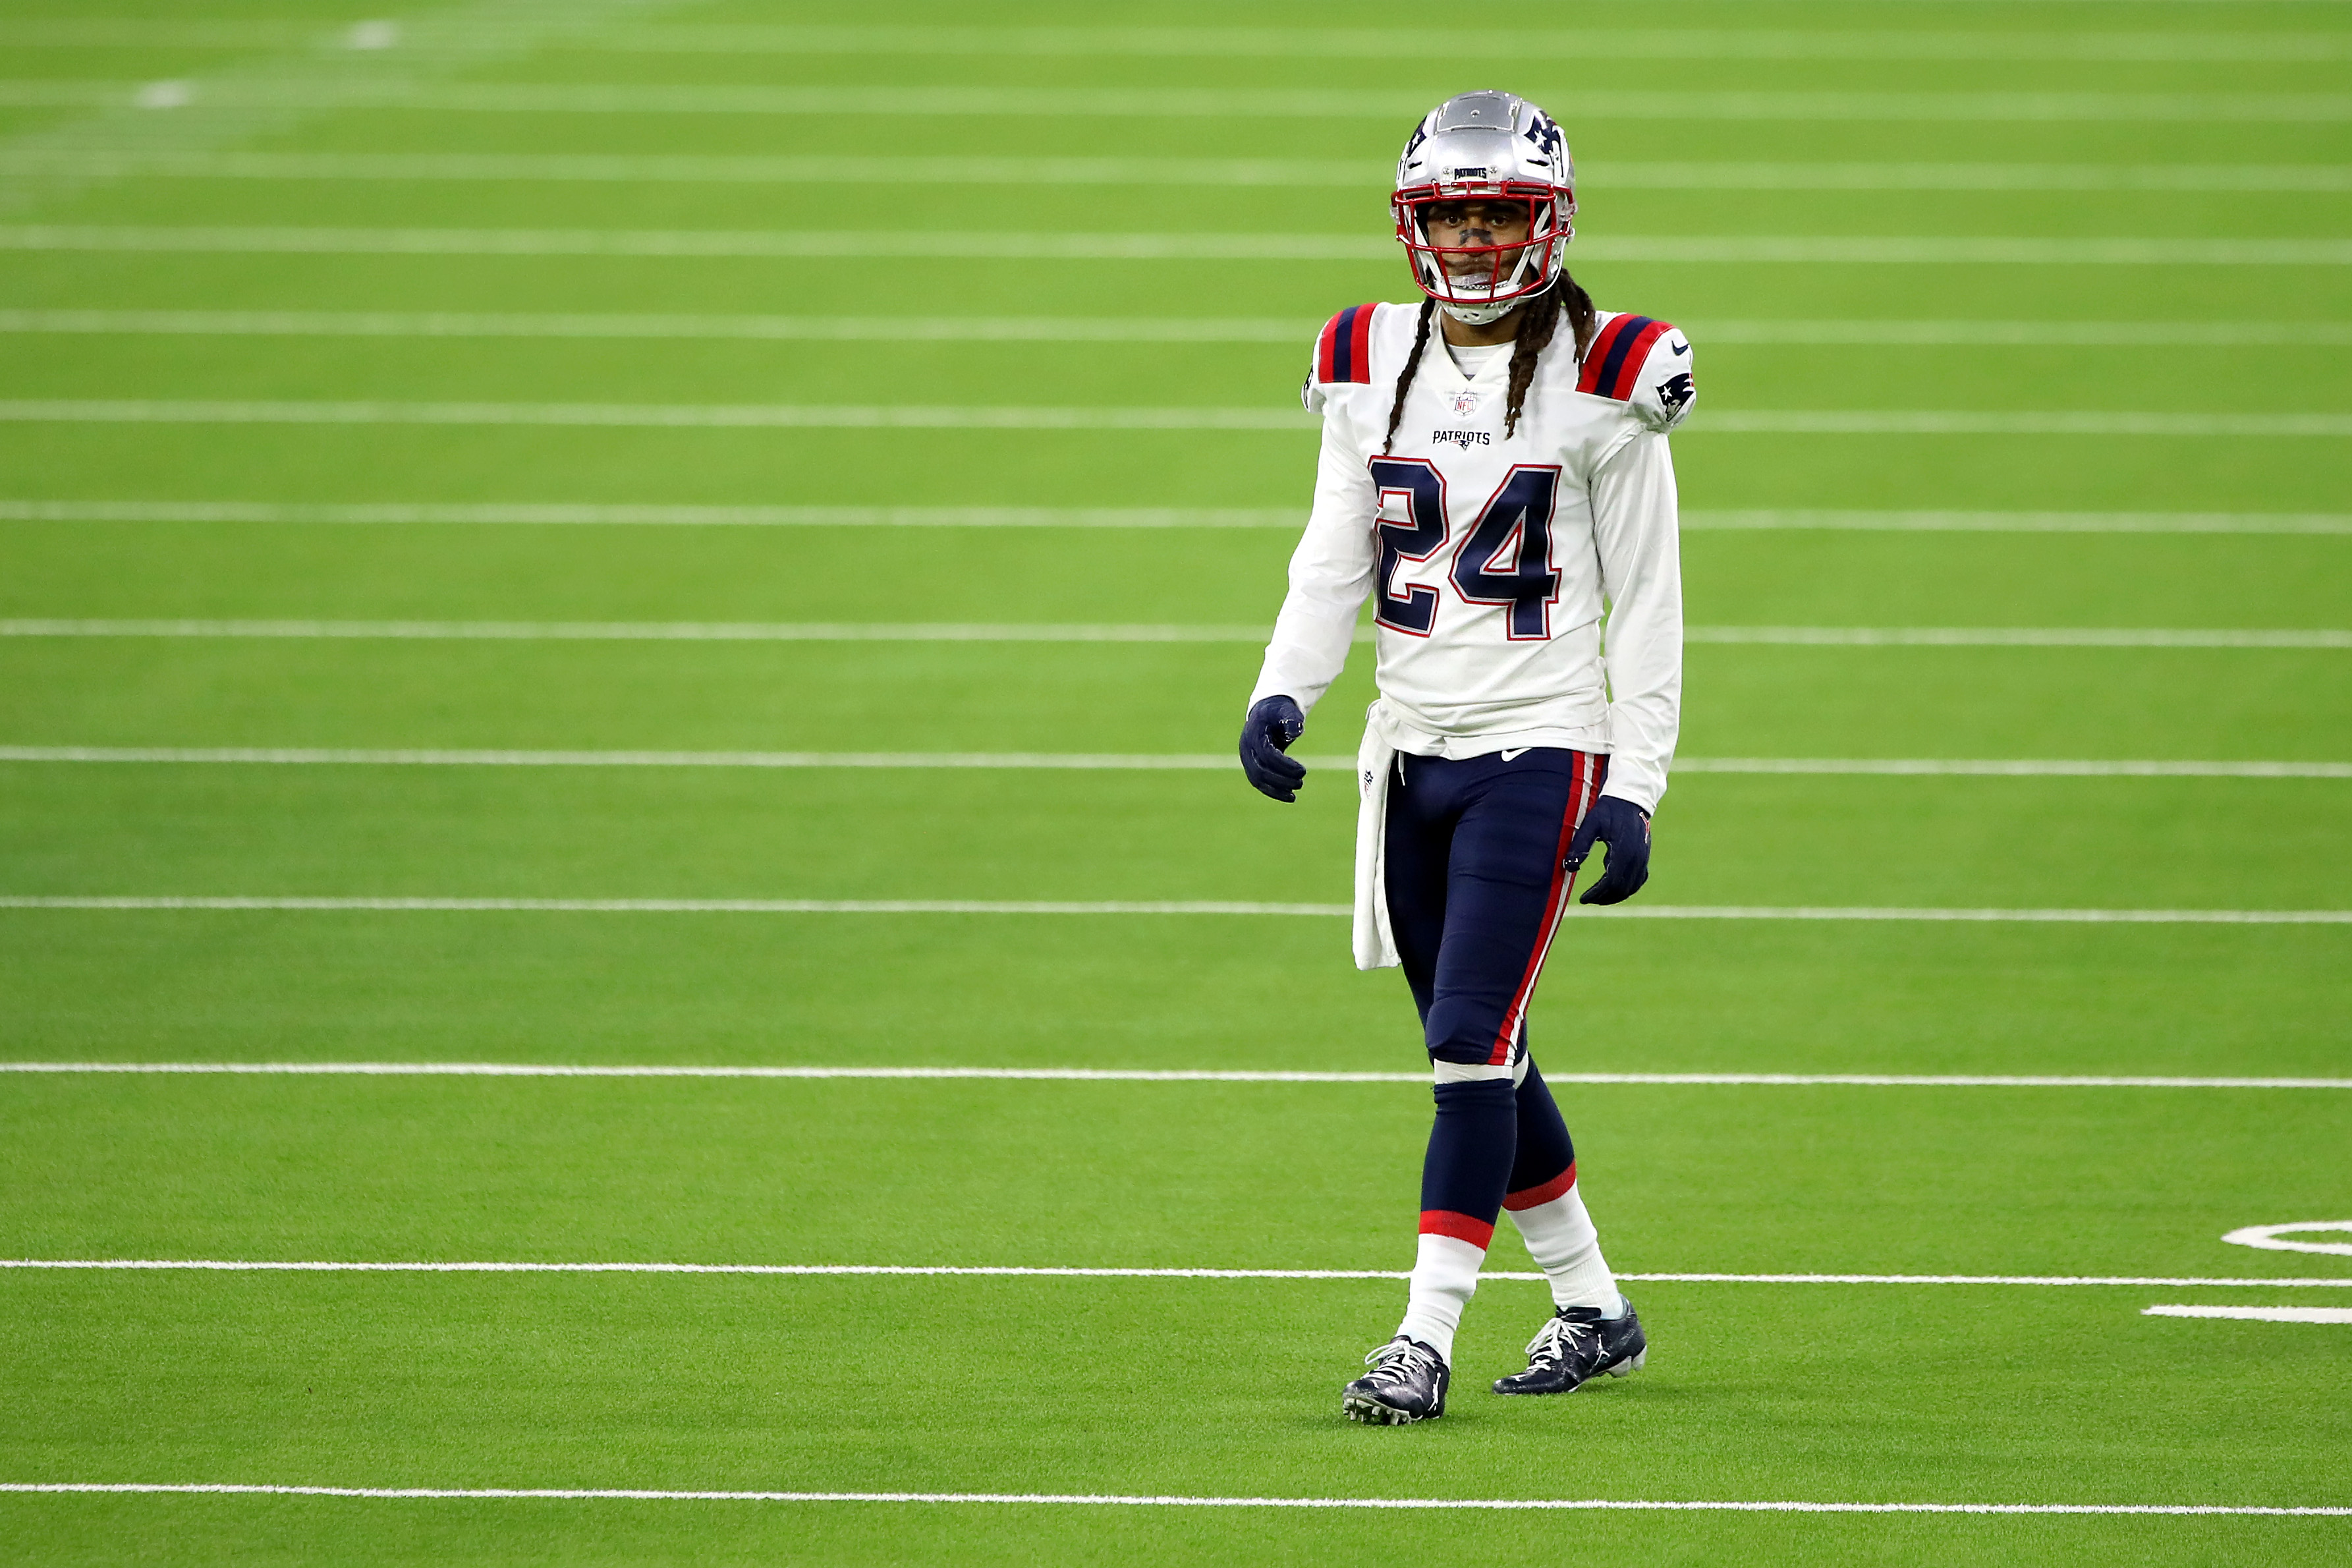 Patriots cornerback Stephon Gilmore stands on the field during a game in December